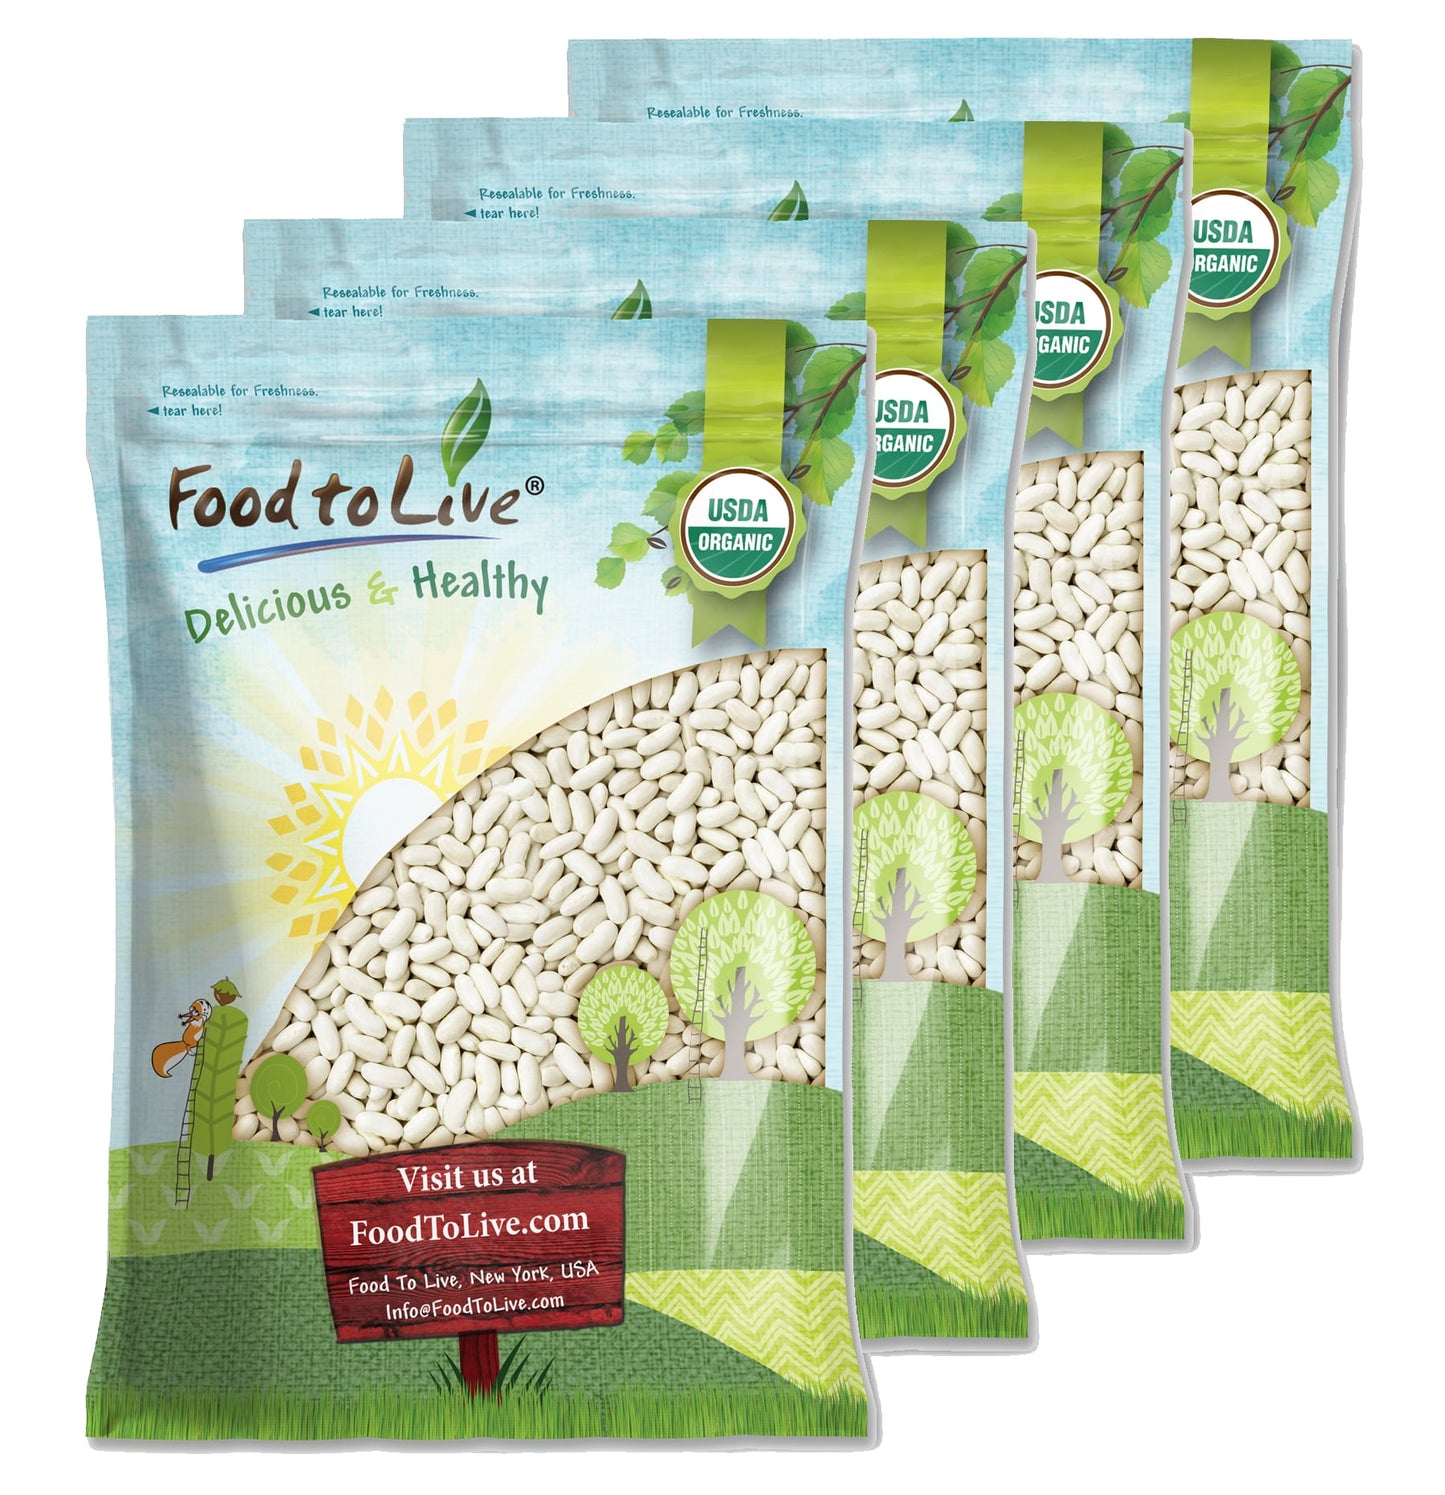 Organic Cannellini Beans - Raw, Dried, Non-GMO, Kosher, White Kidney Beans in Bulk, Product of the USA, Sirtfood - by Food to Live